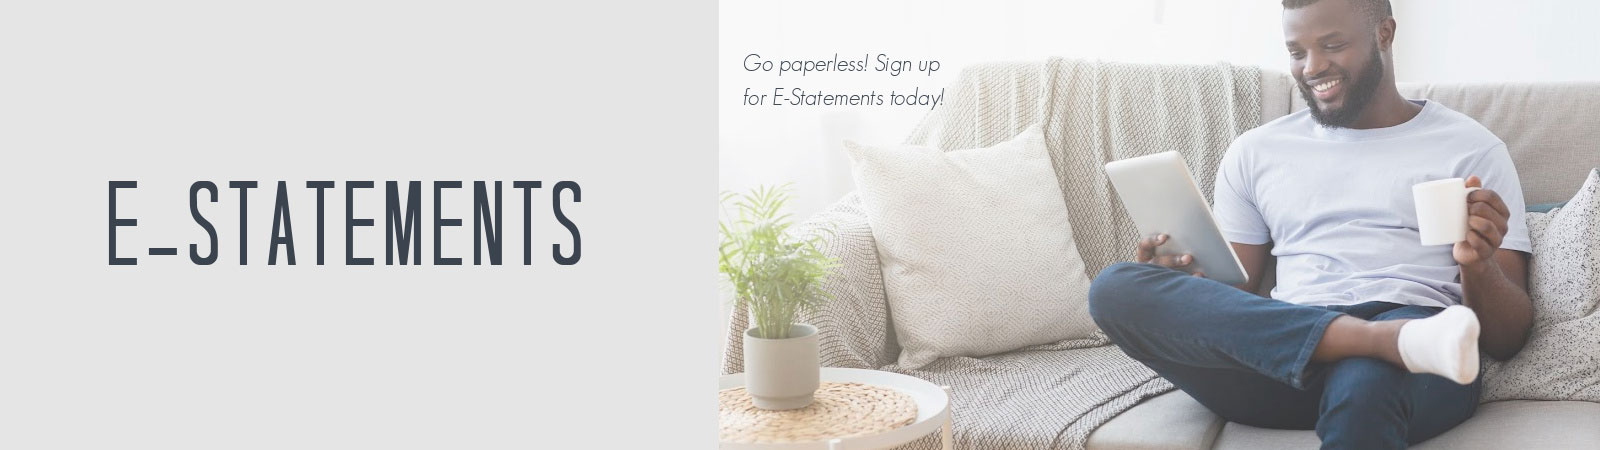 Go paperless. Sign up for e-statemetns today